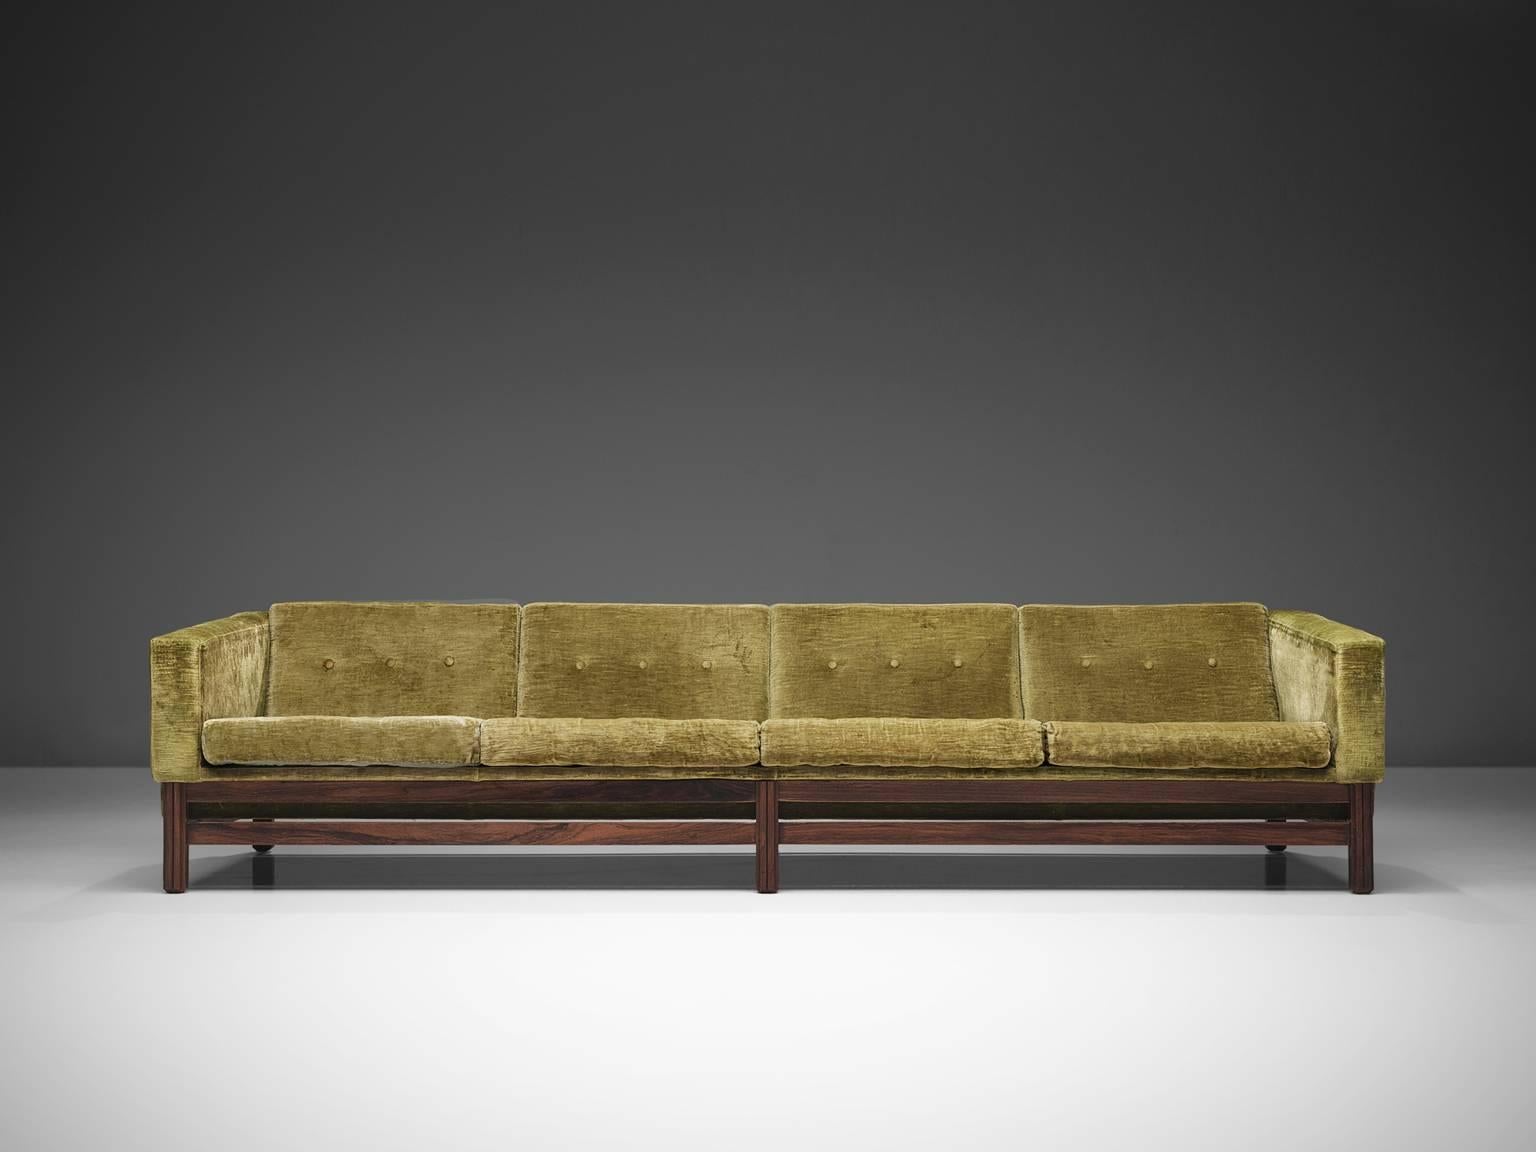 Saporiti, four-seat sofa, green velvet and rosewood, Italy, 1960s. 

The sofa is designed in order to give it that very distinguished long and low look. Loose cushions on seating and back. The tufted cushions give the long and straight design a